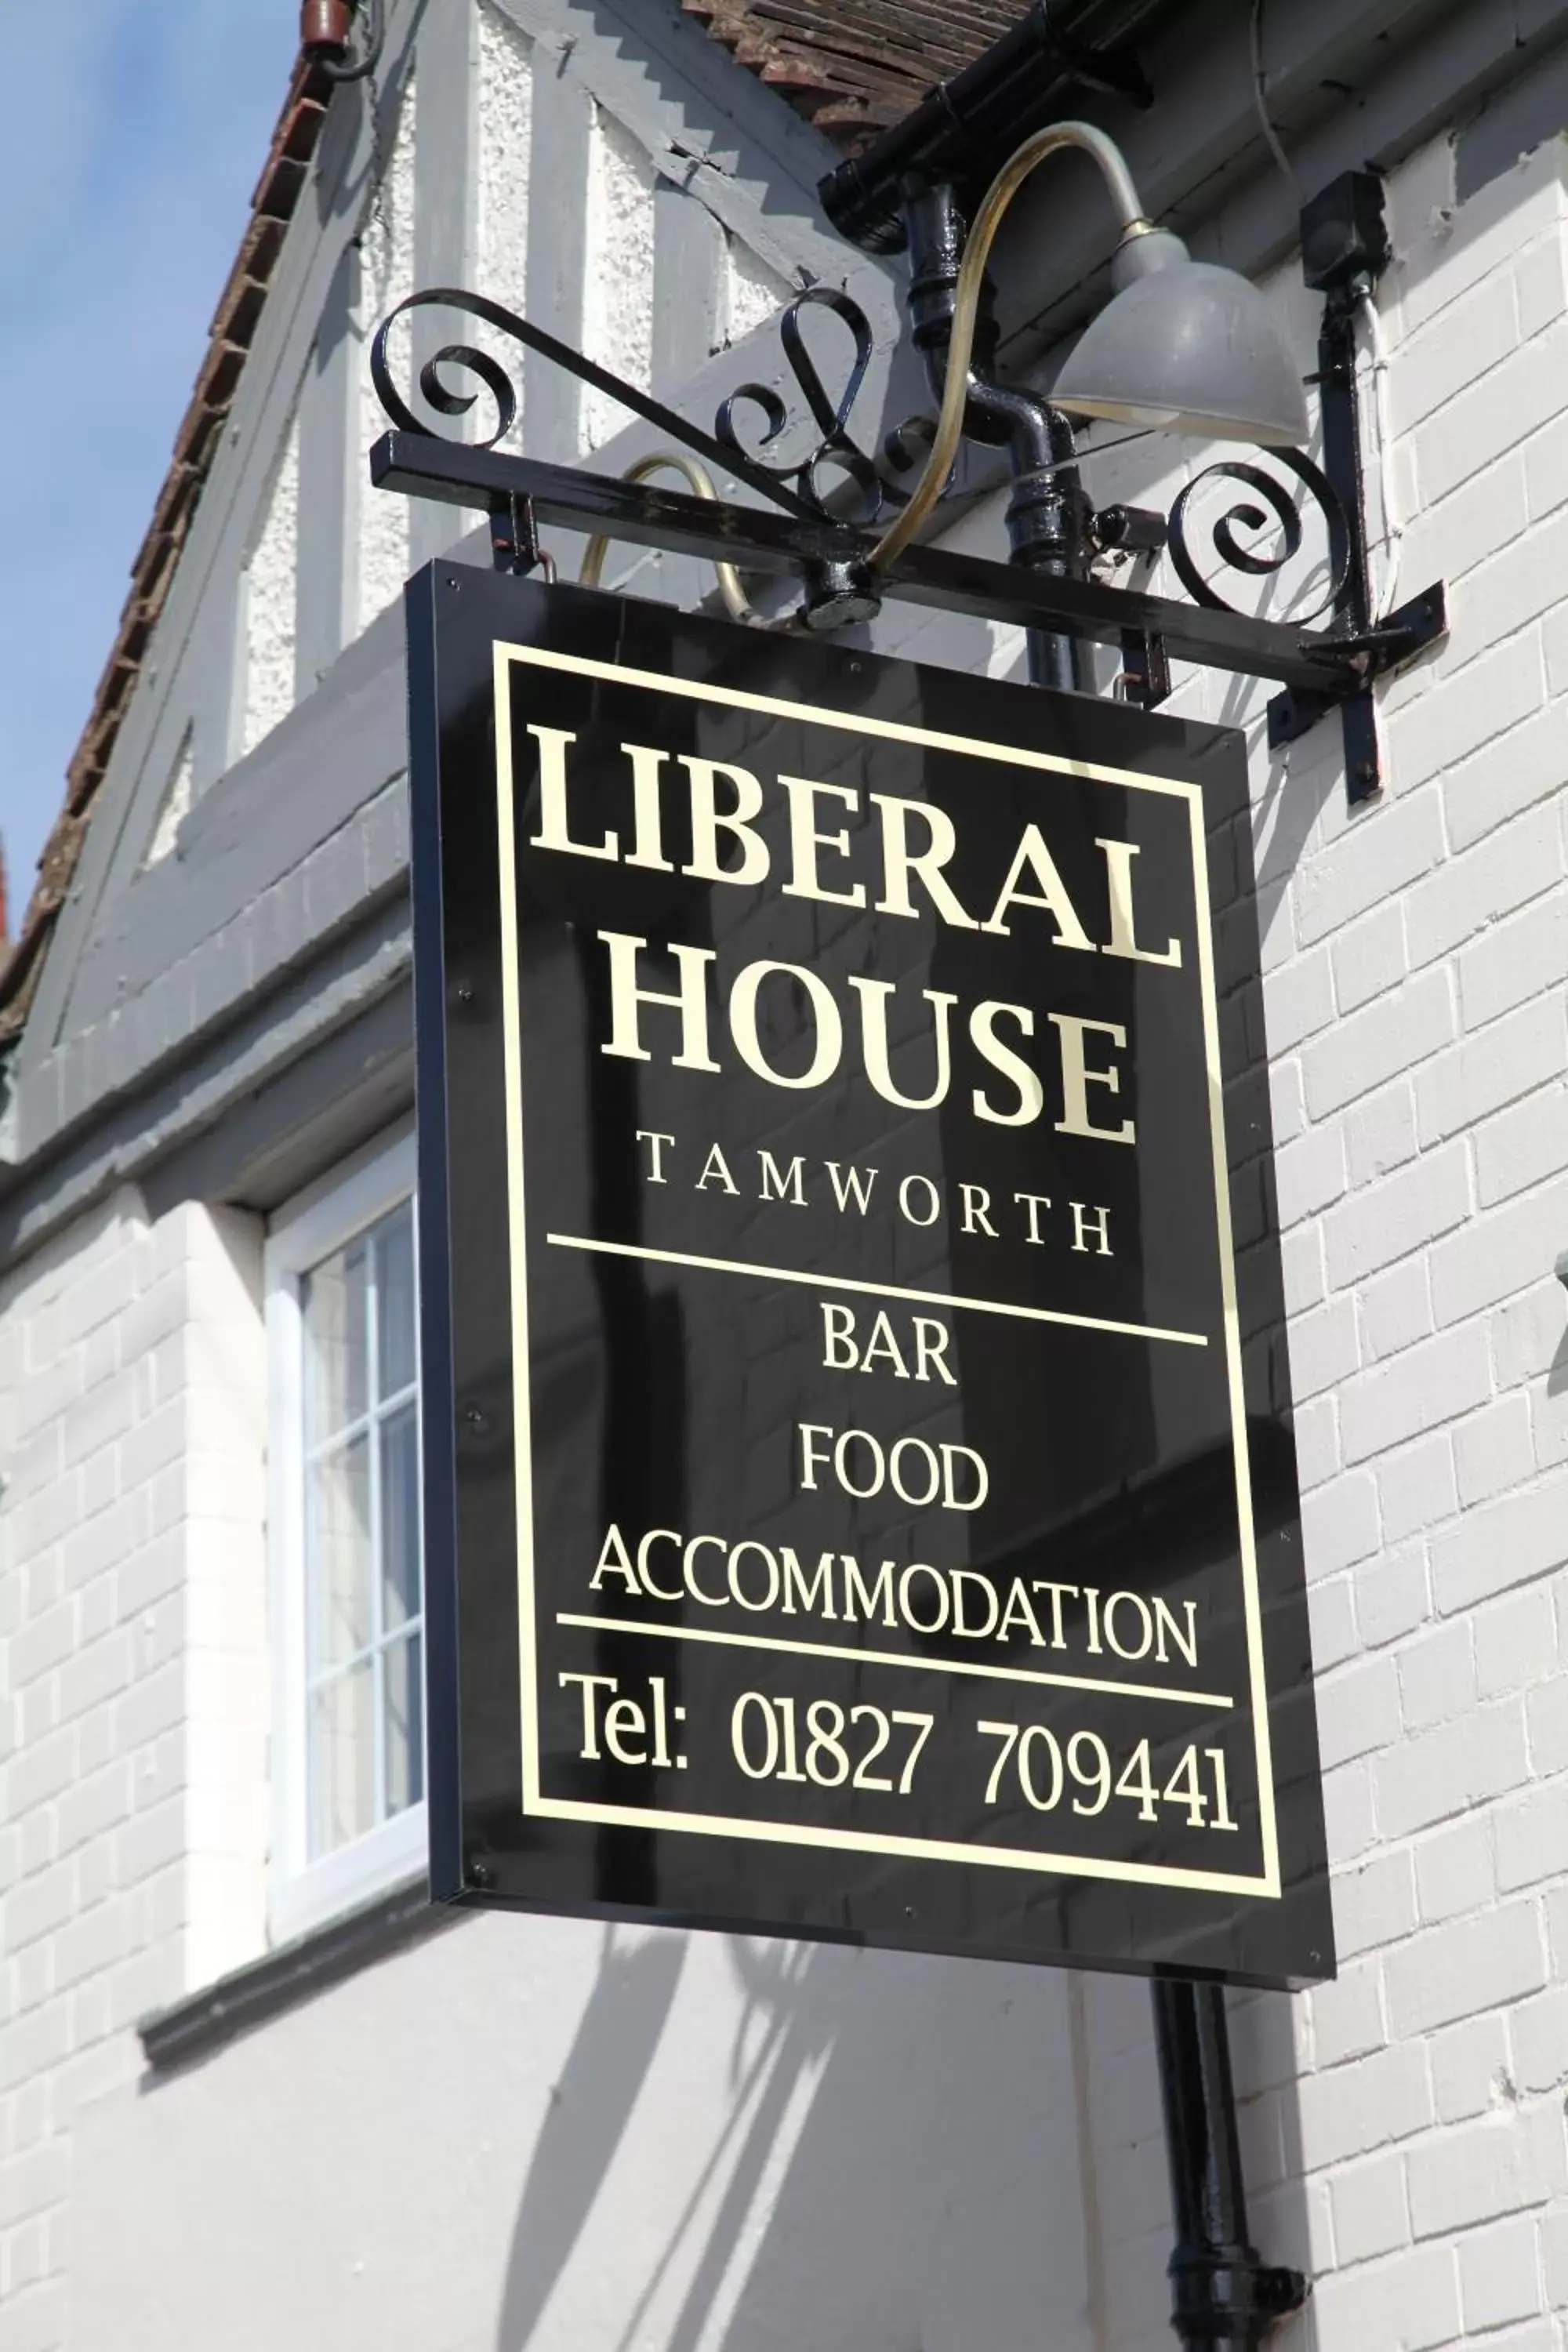 Property building in Liberal House Tamworth